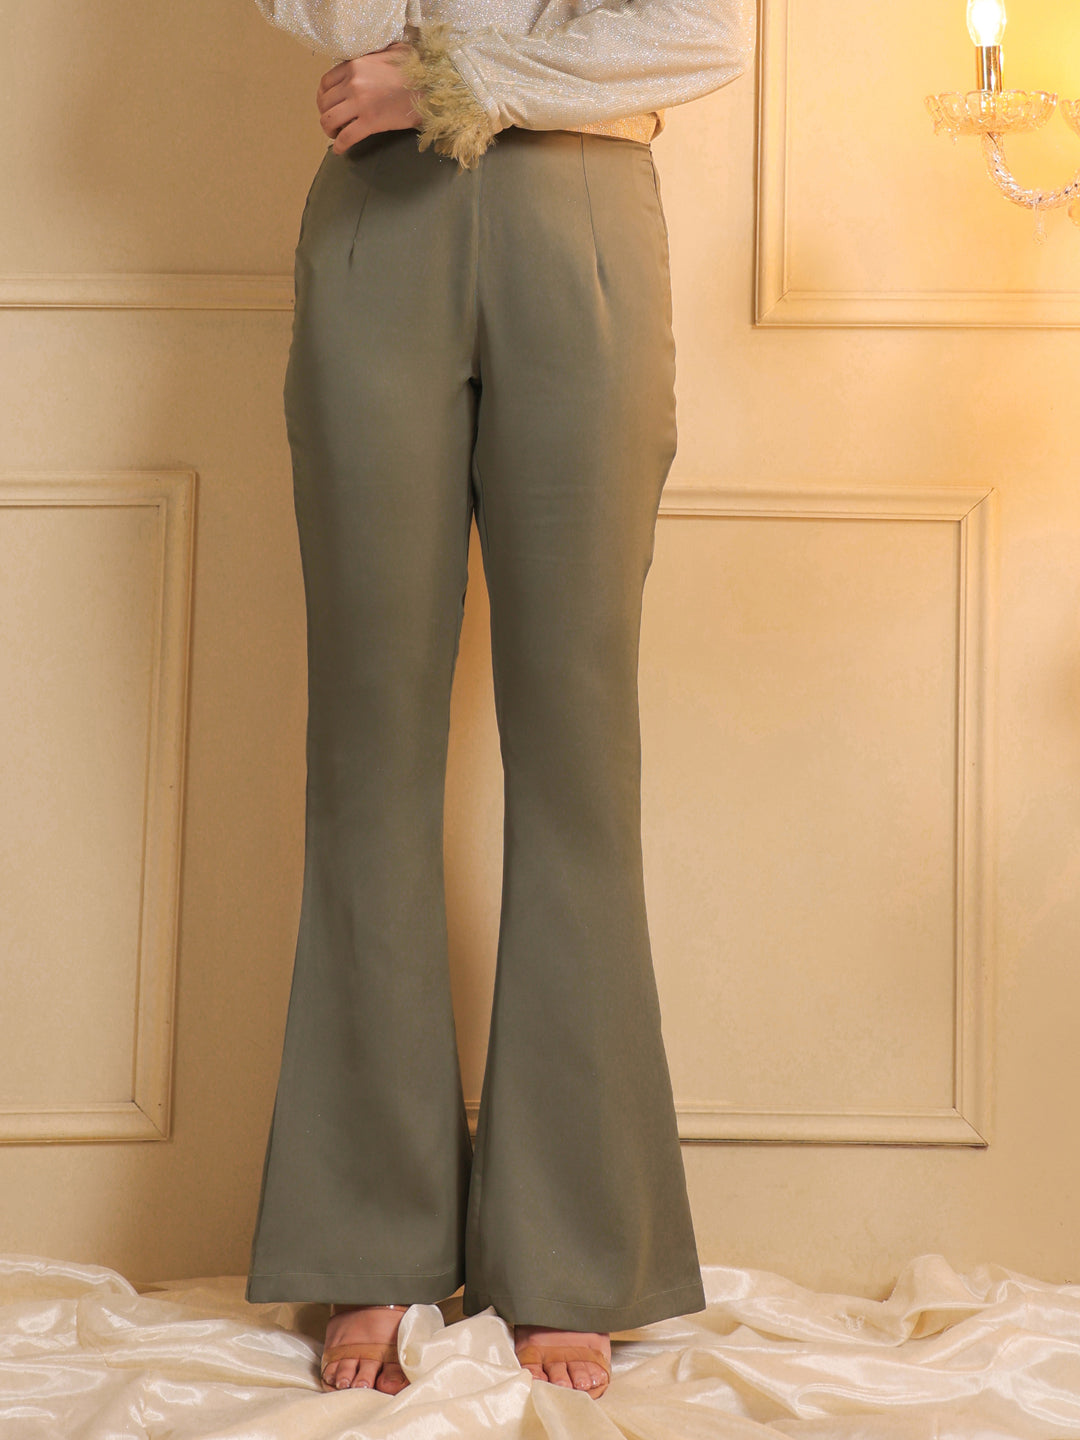 Olive Gleam Trousers